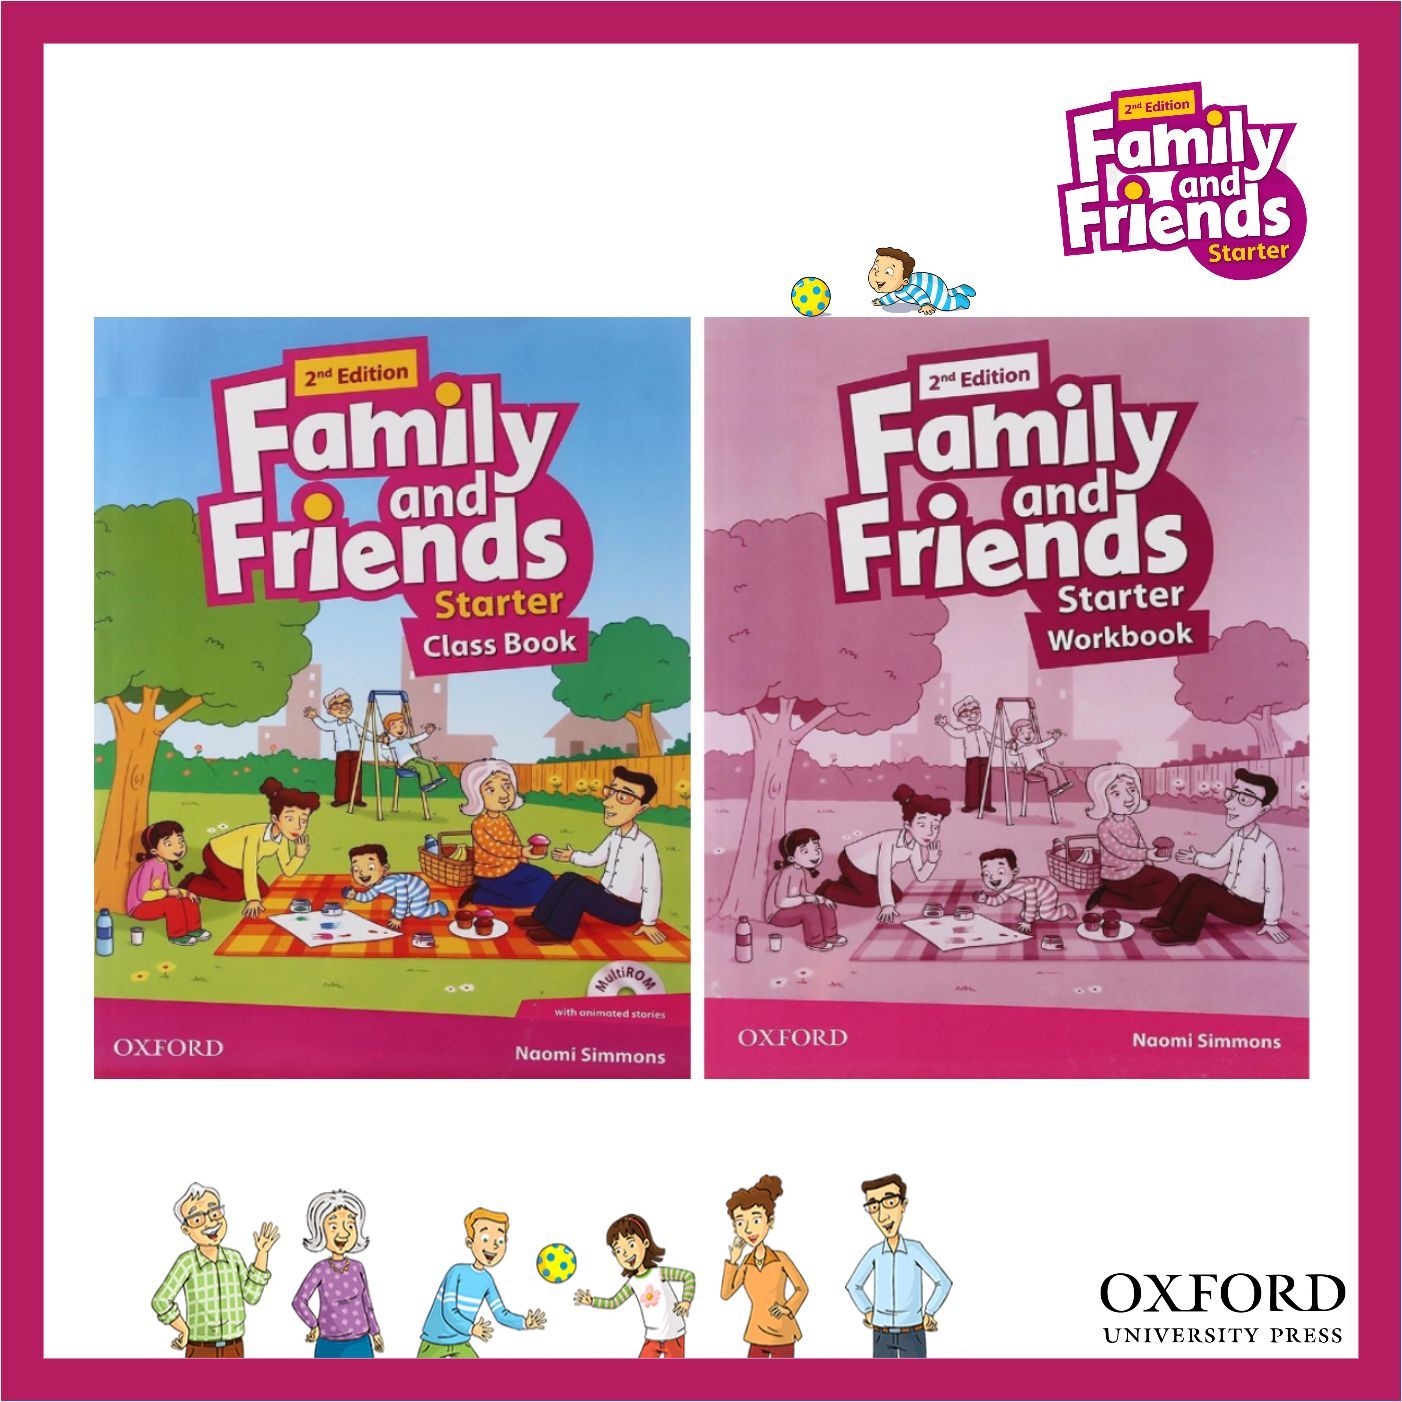 Friends starter book. 2nd Edition Family friends Workbook Oxford Naomi Simmons. Family and friends: Starter. Family and friends Starter class book. Family and friends Starter Workbook.